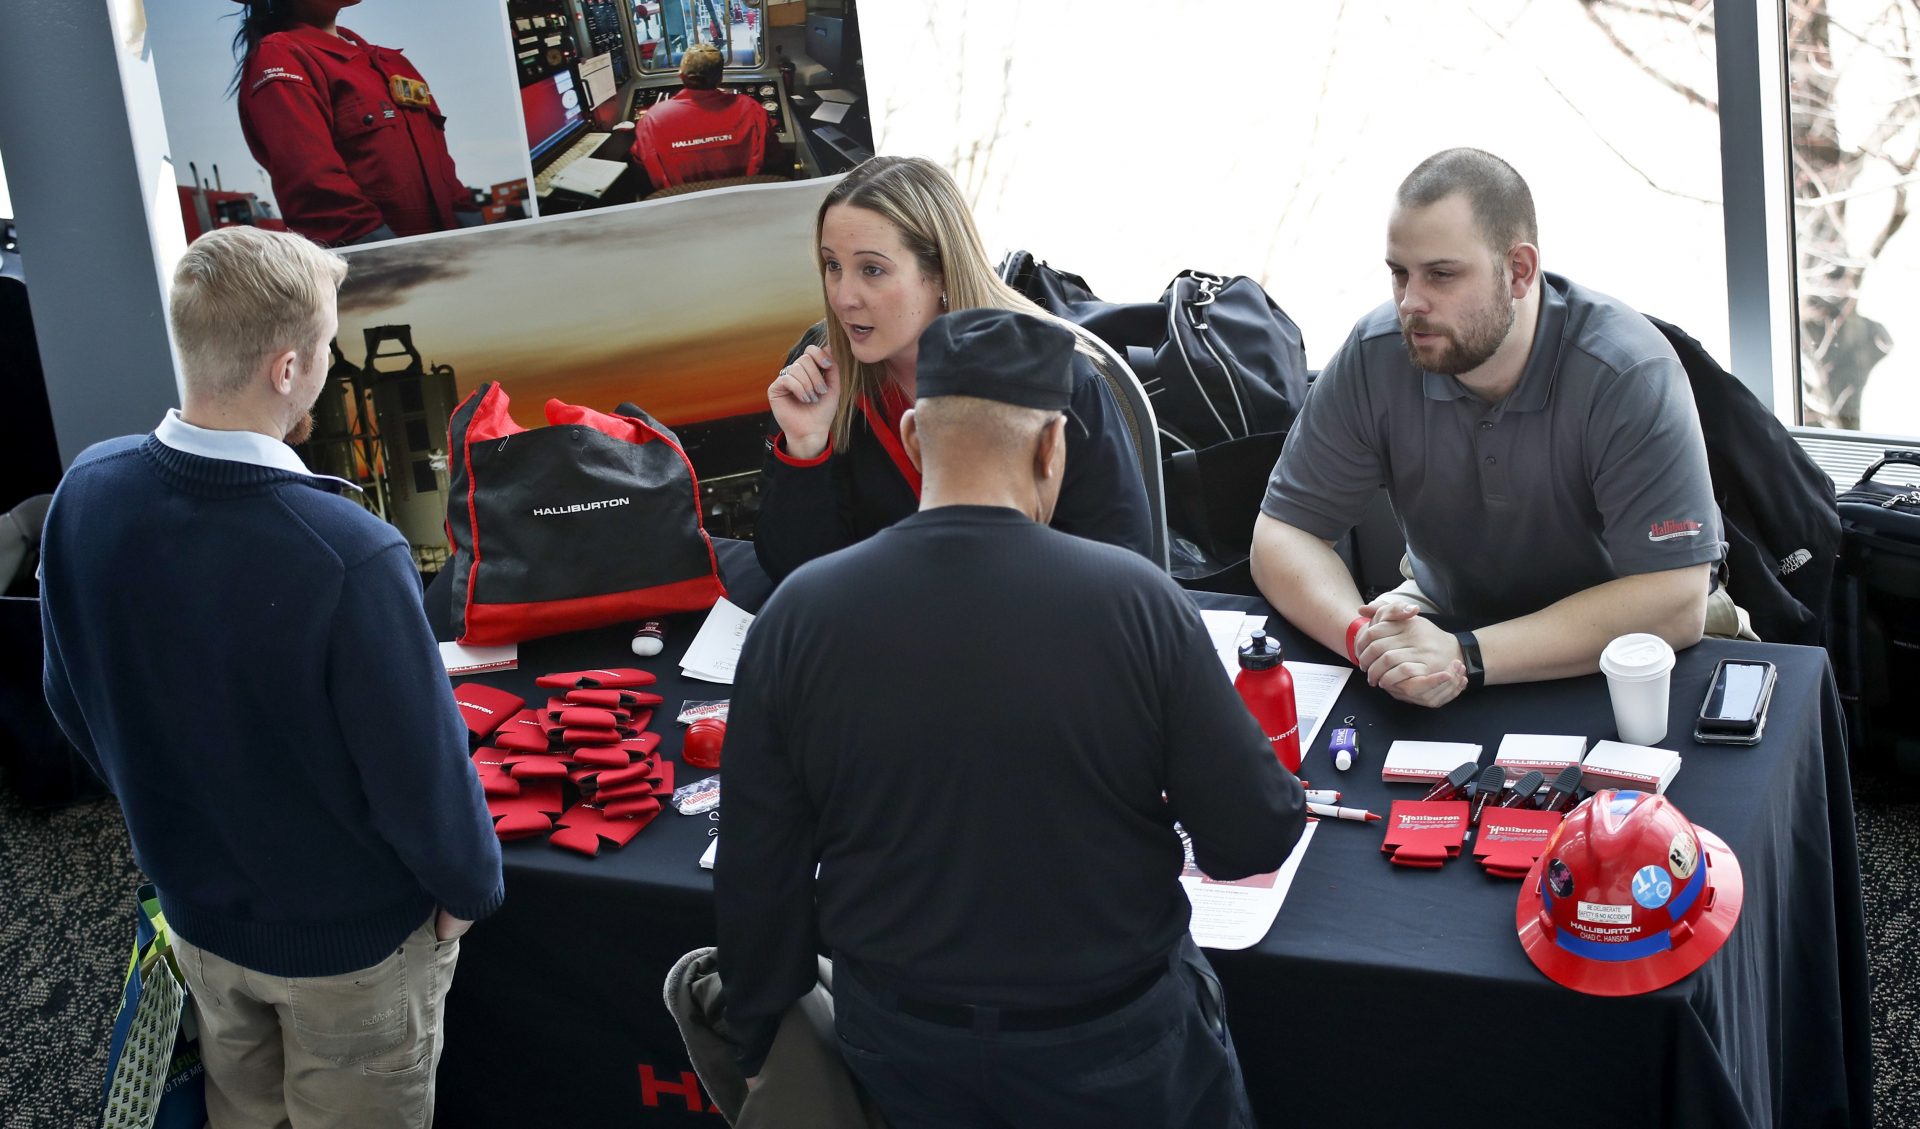 In this March 7, 2019, file photo, visitors to the Pittsburgh veterans job fair meet with recruiters at Heinz Field in Pittsburgh.